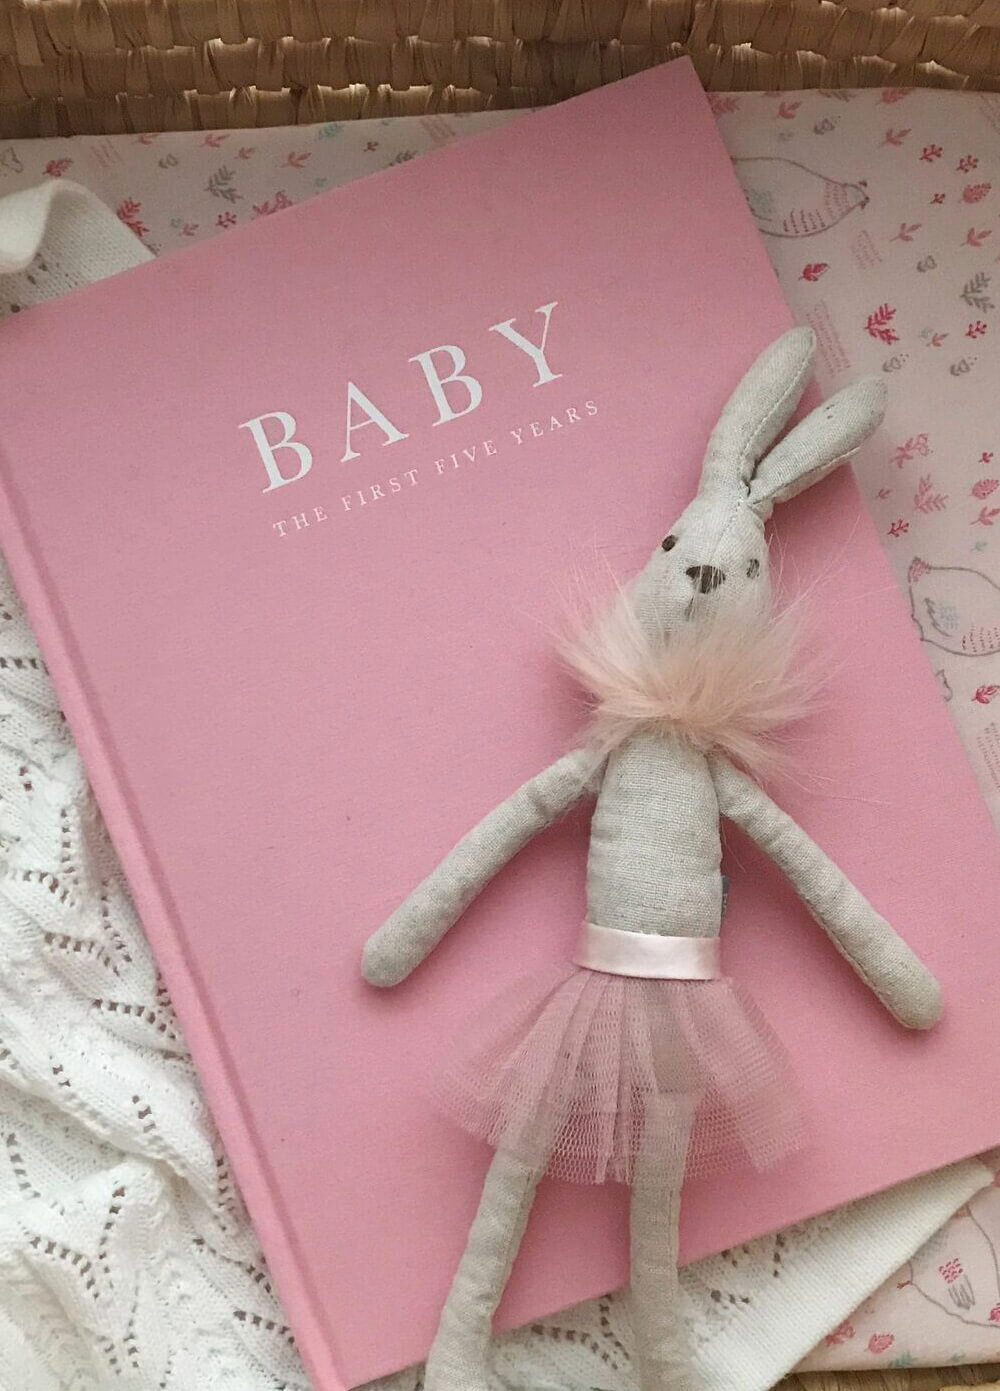 Pink Baby Journal (Birth to Five Years) by Write to Me